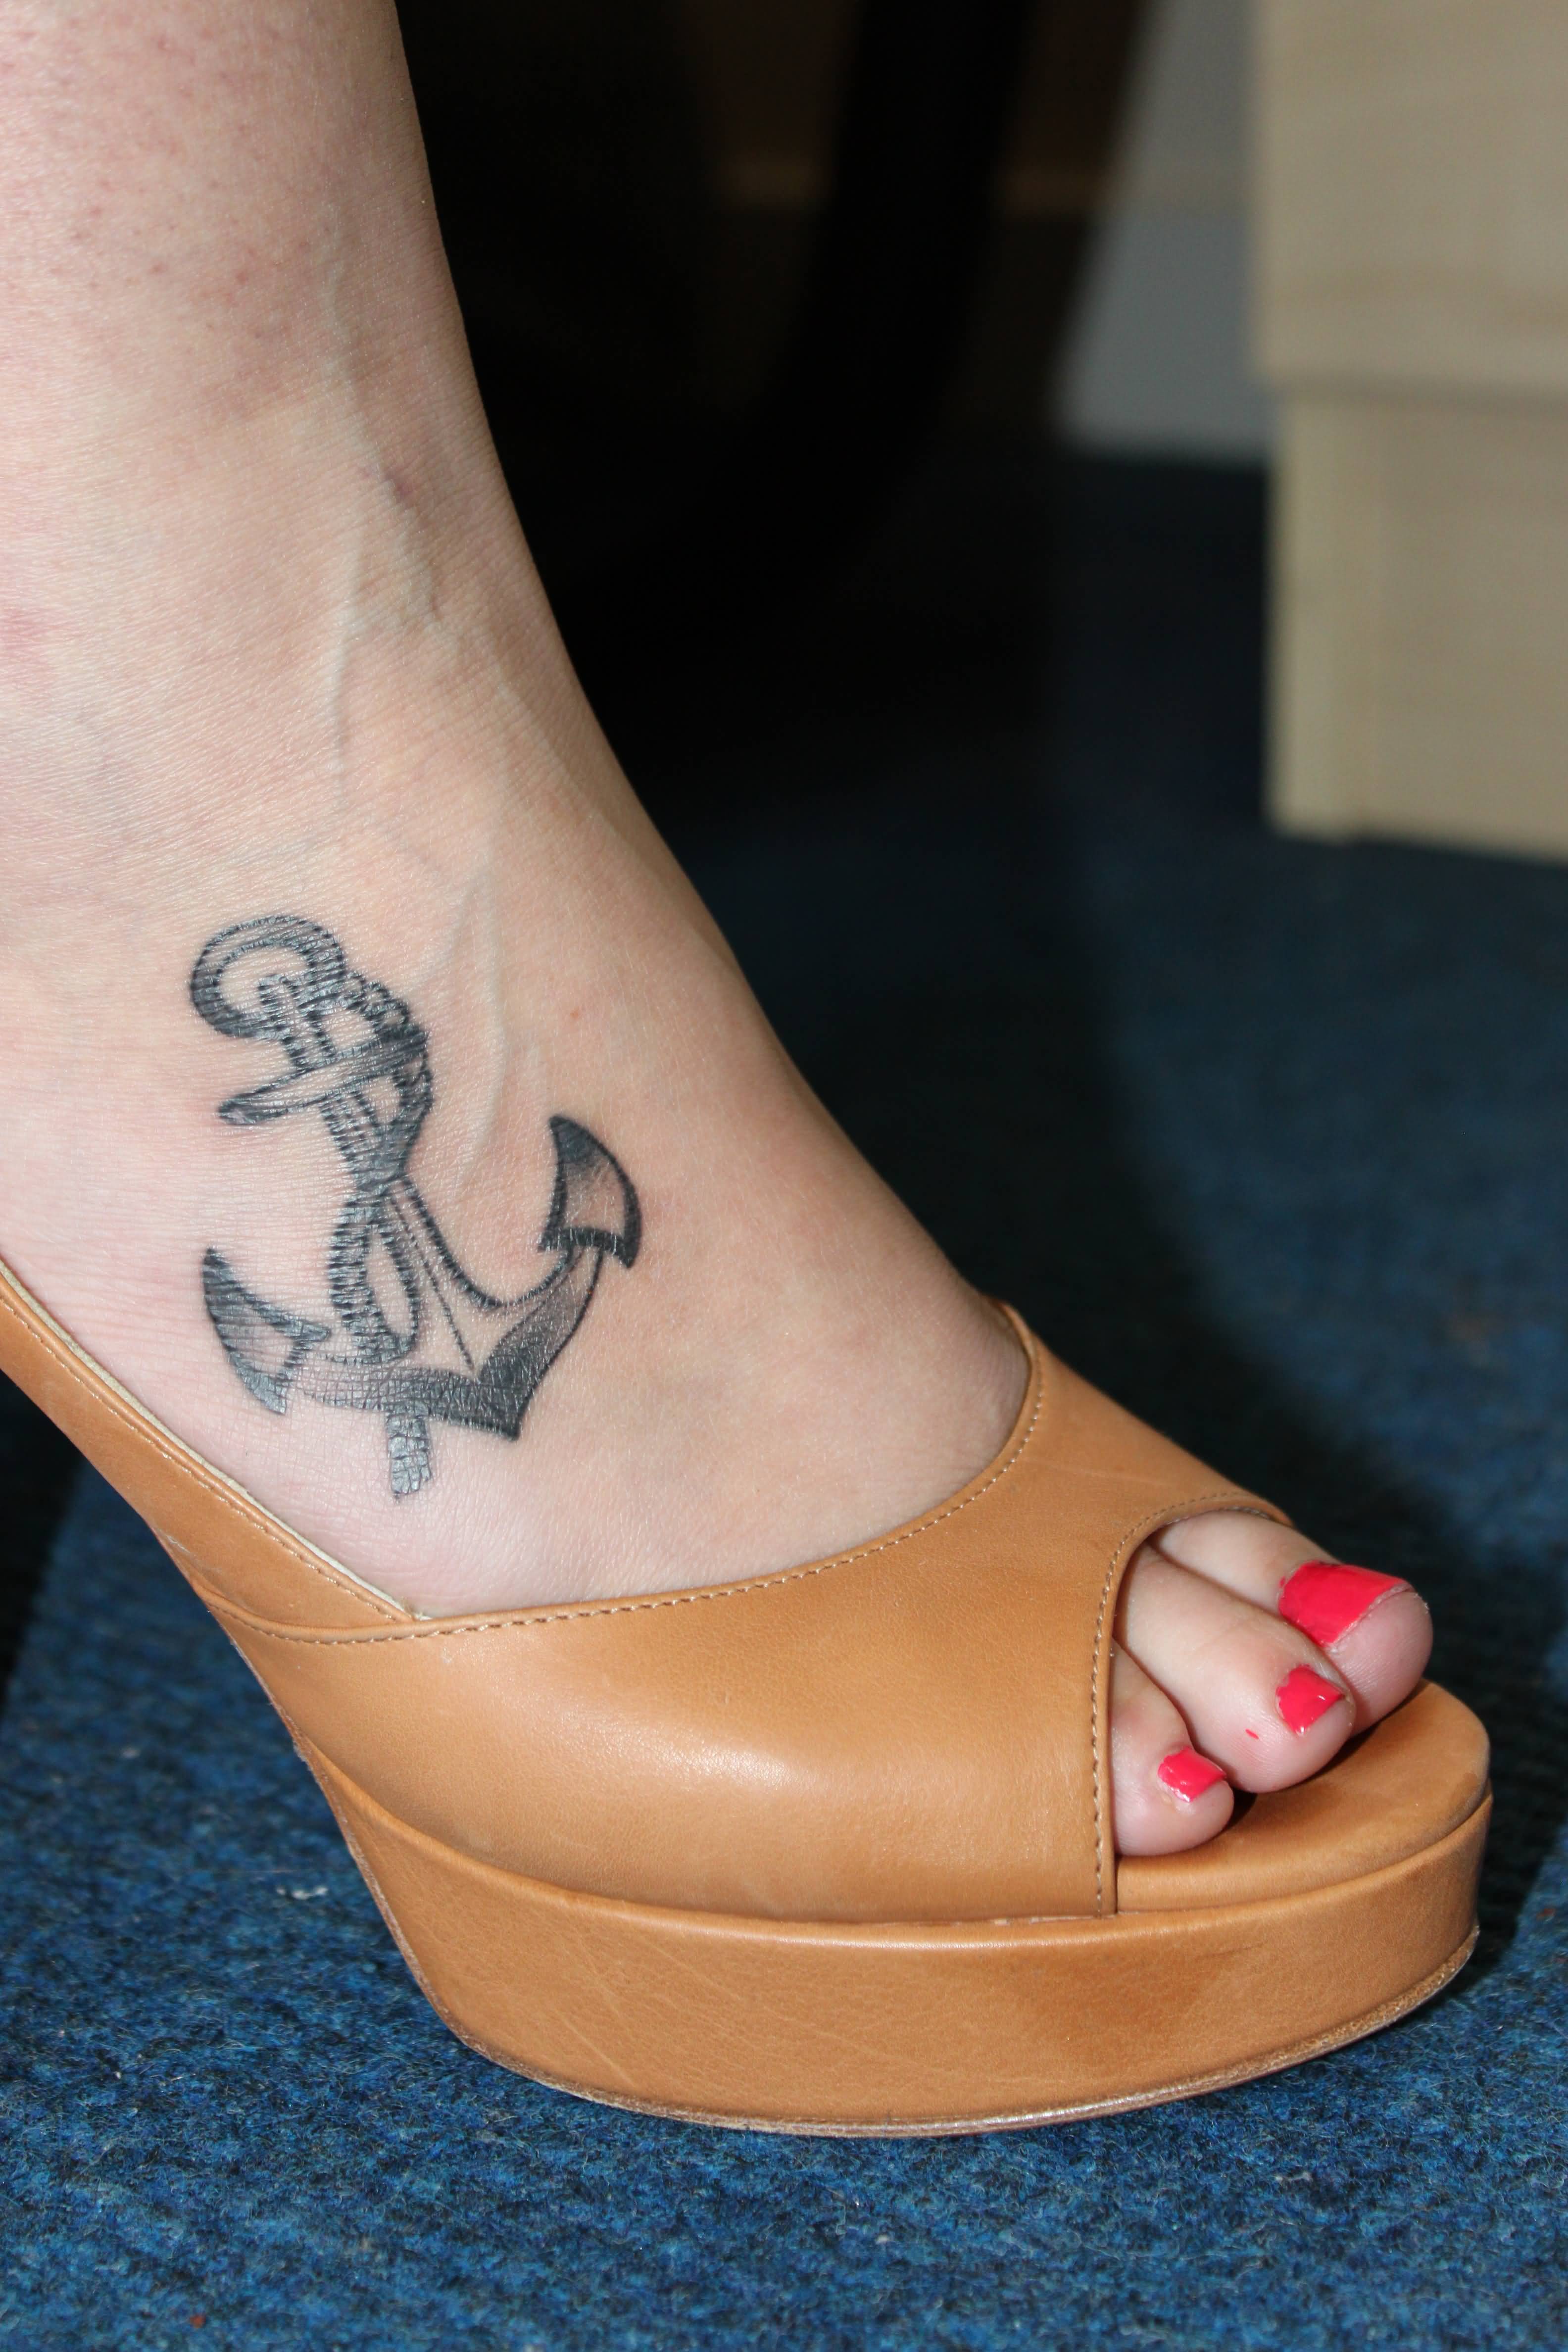 Grey Rope Anchor Tattoo On Foot